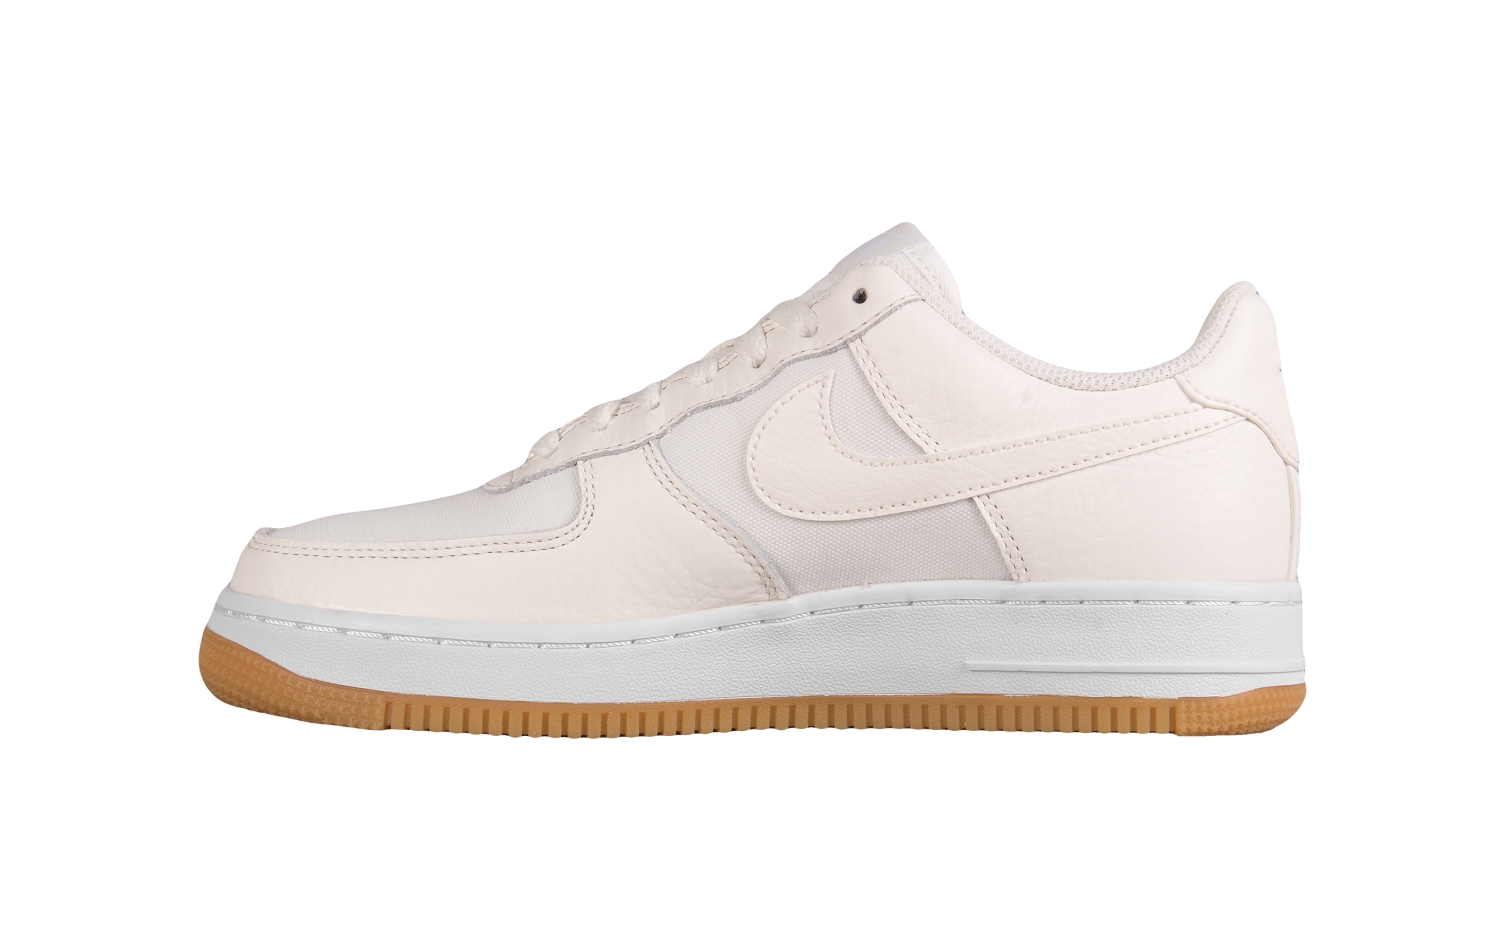 Nike Wmns Air Force 1 07 PM (896185-101)